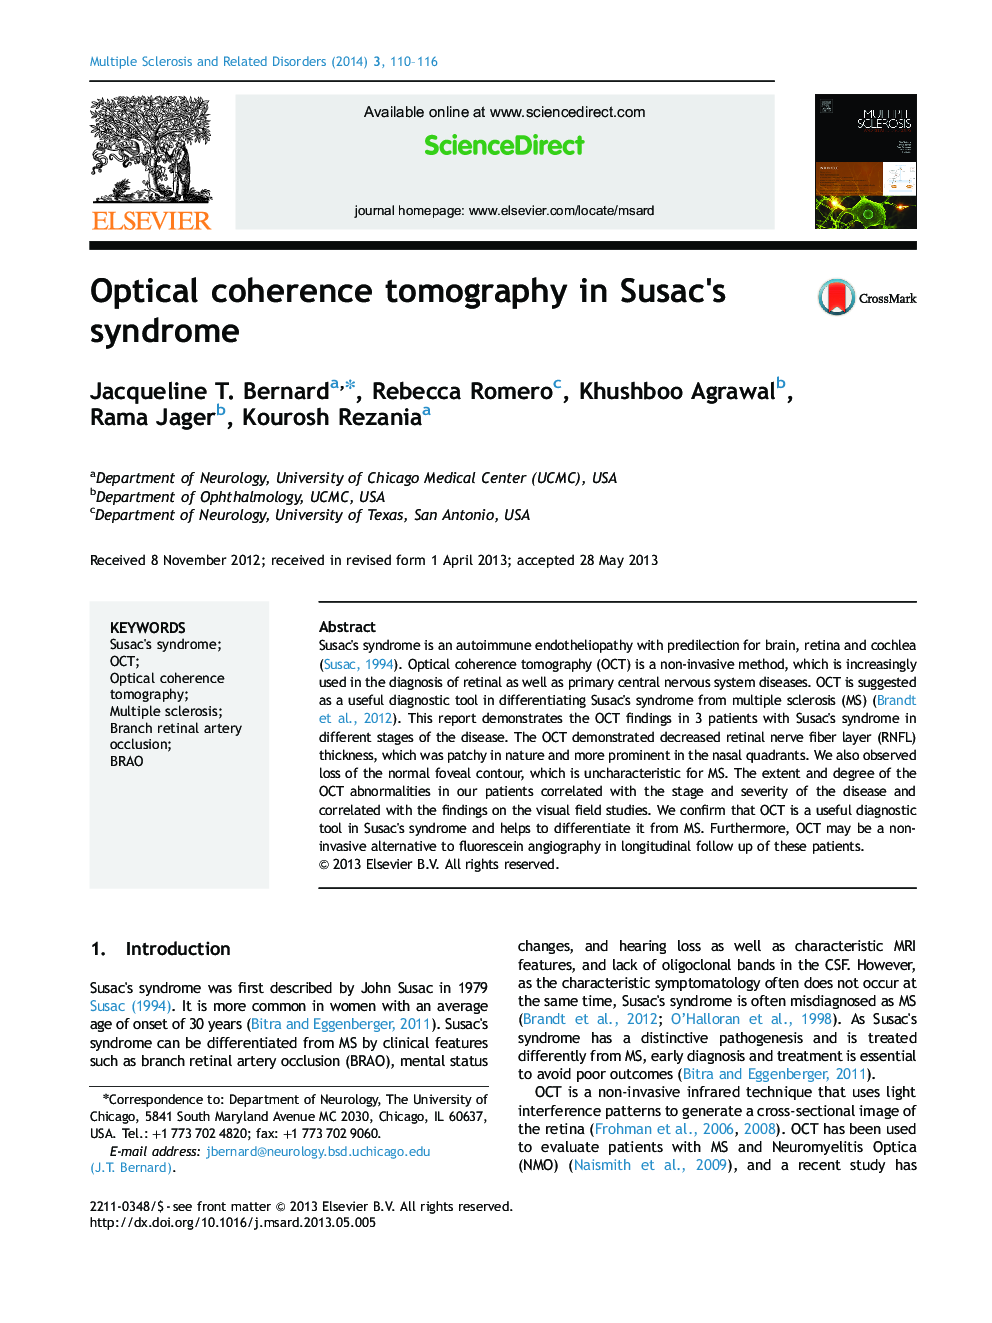 Optical coherence tomography in Susac's syndrome